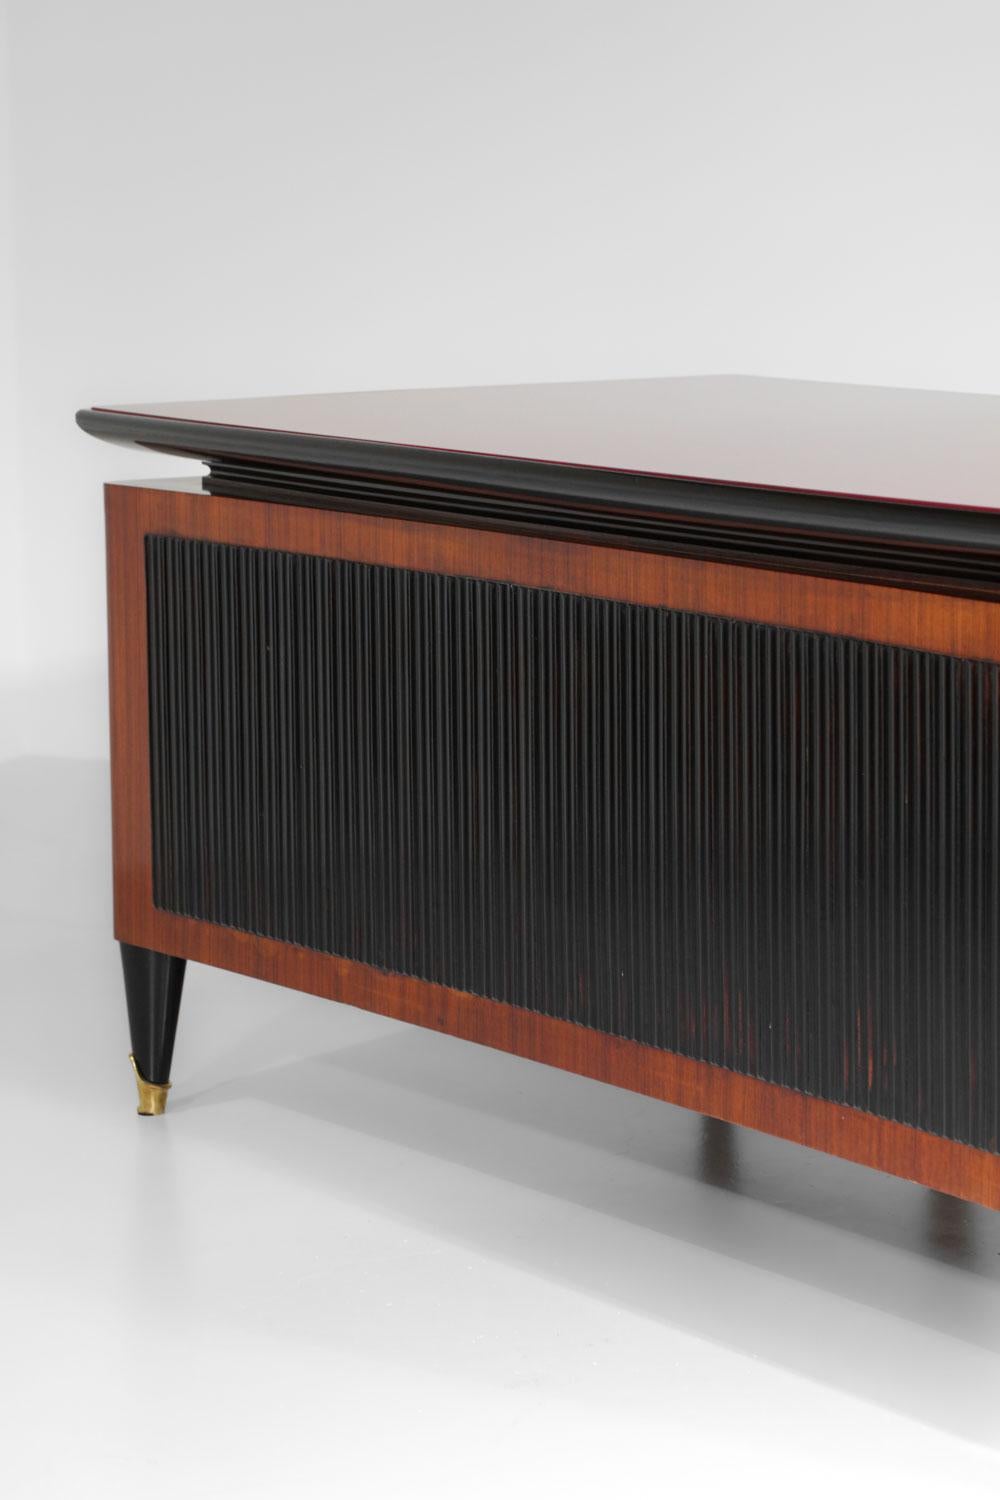 Italian large Desk by Vittorio Dassi solid wood and glass 60s - G725 For Sale 10